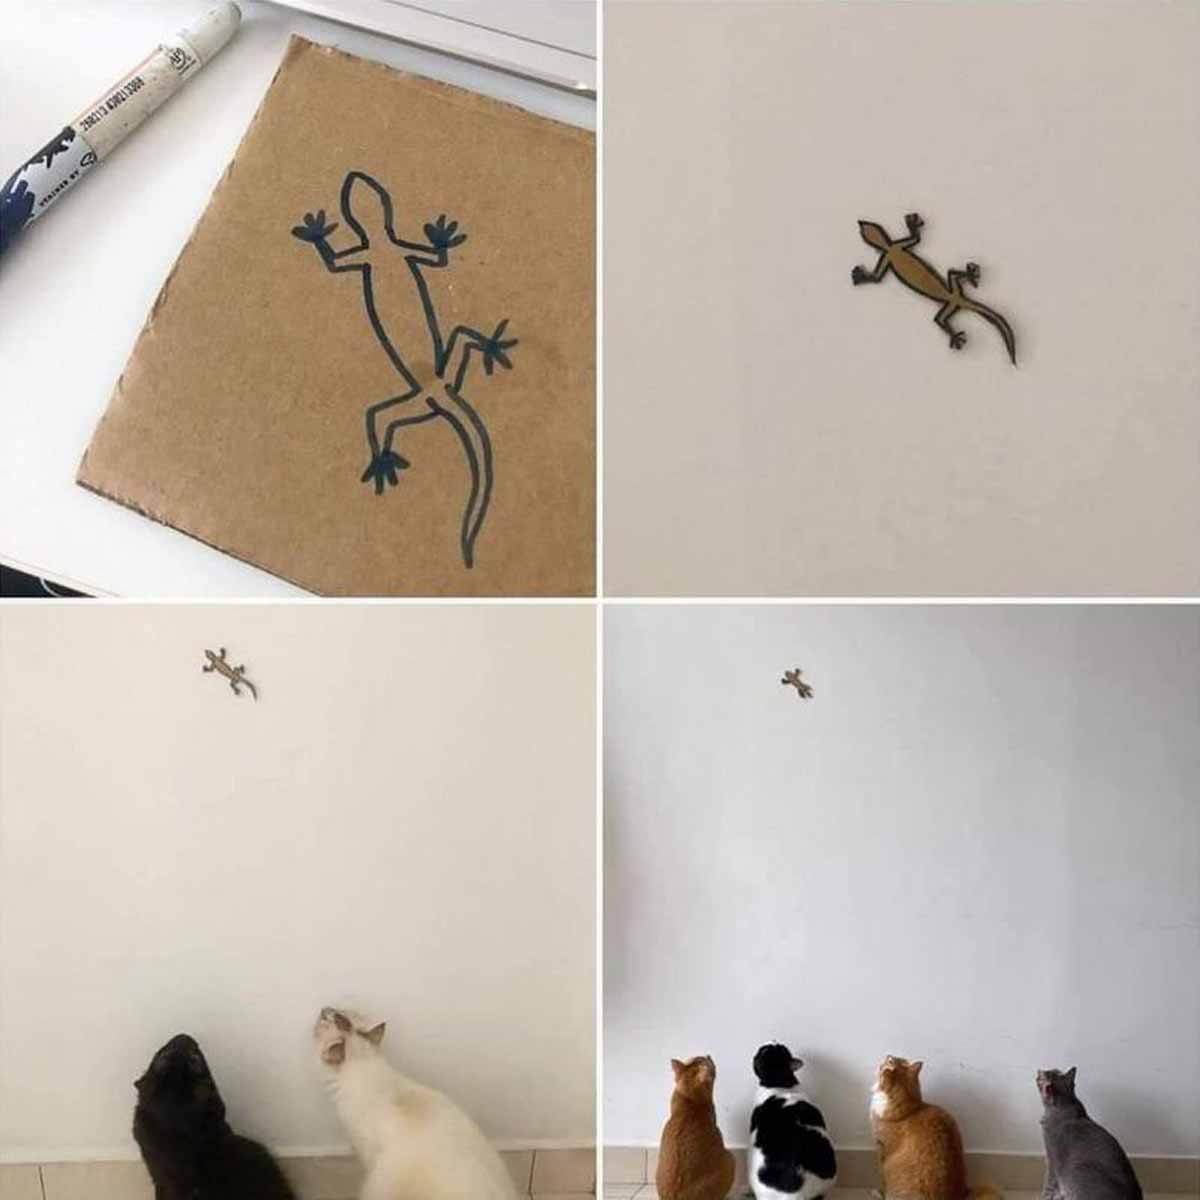 Picture of a drawing of a lizard on cardboard, then a picture of it cutout and stuck to a wall, then two pictures of cats under it staring at it